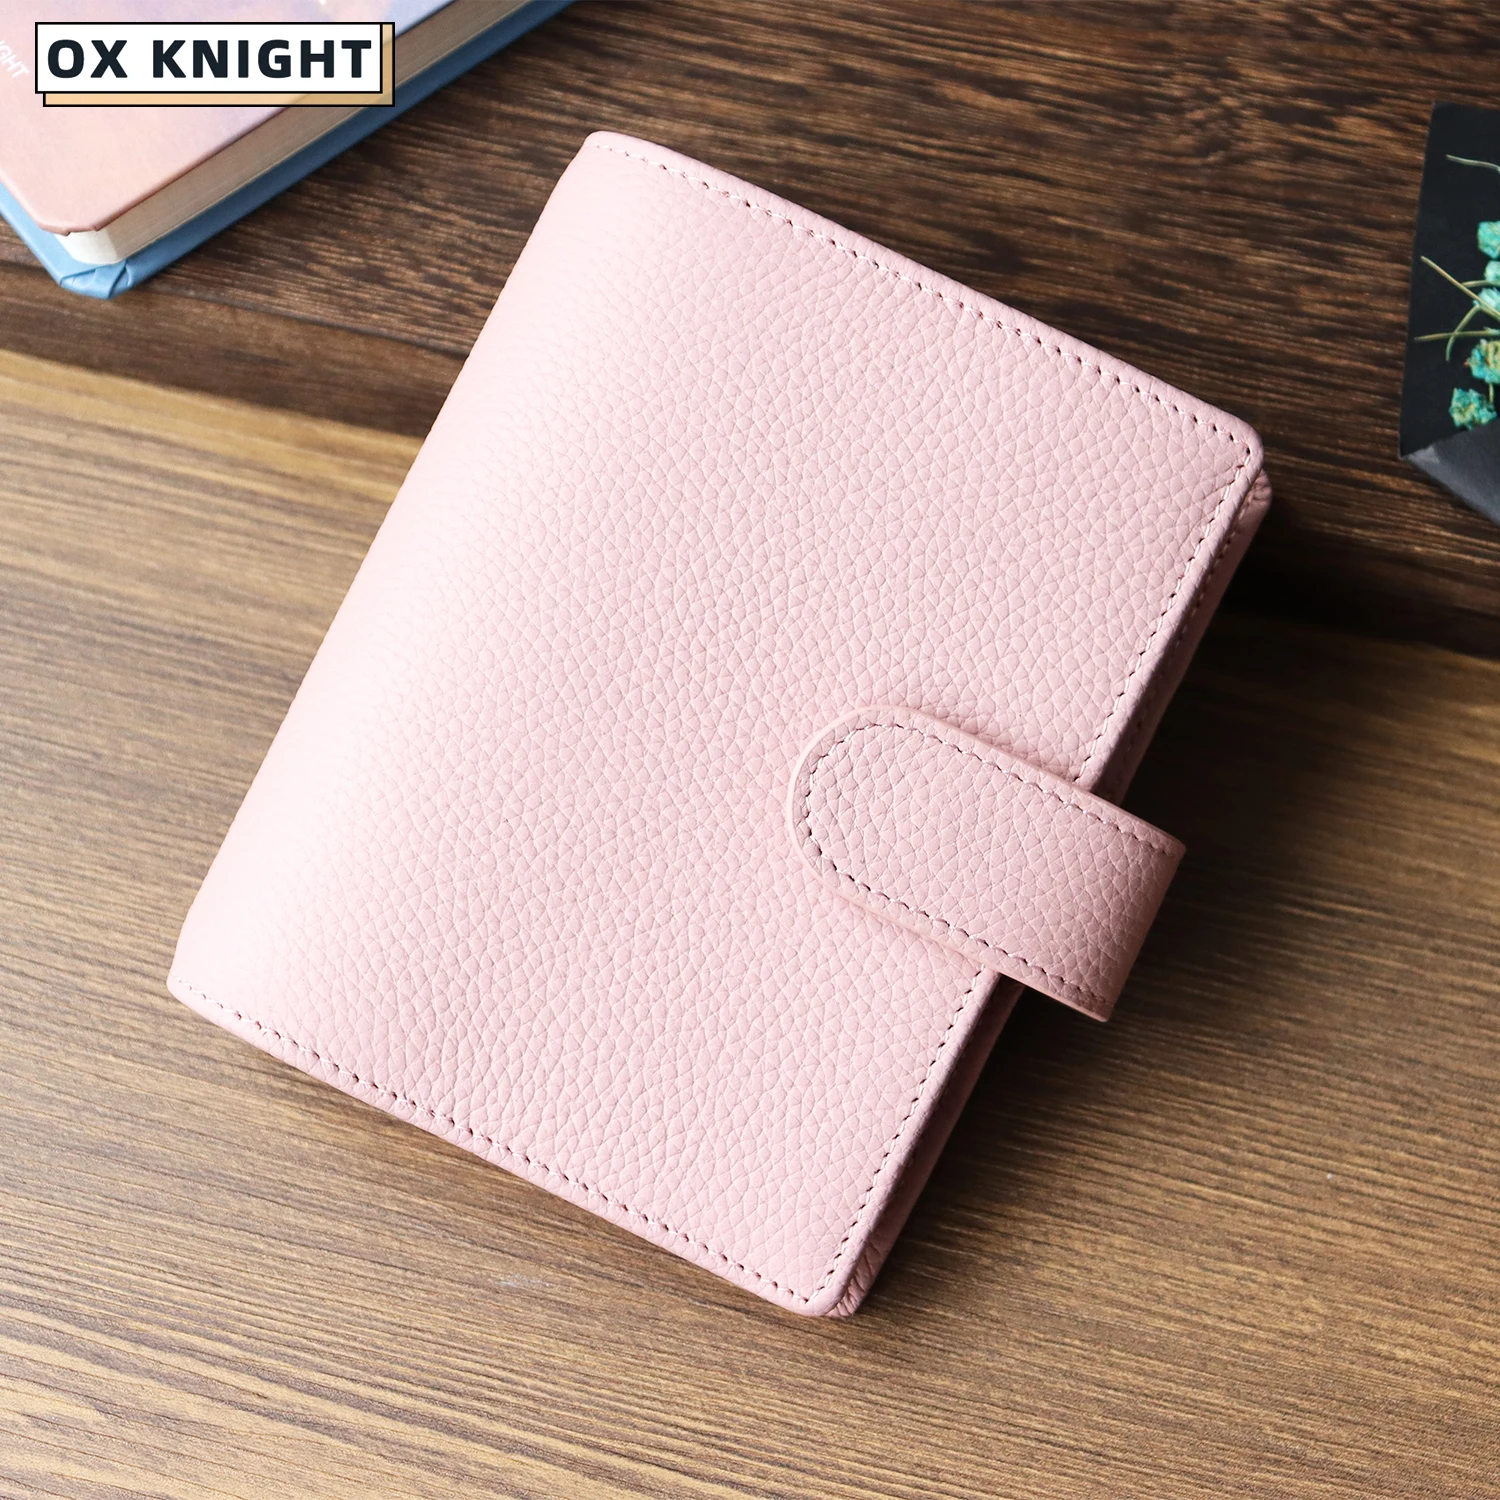 OX KNIGHT Regular A8 Size Rings Budget Planner Pebbled Grain Style Leather Notebook Journaling Stationery Book Cover Organizer